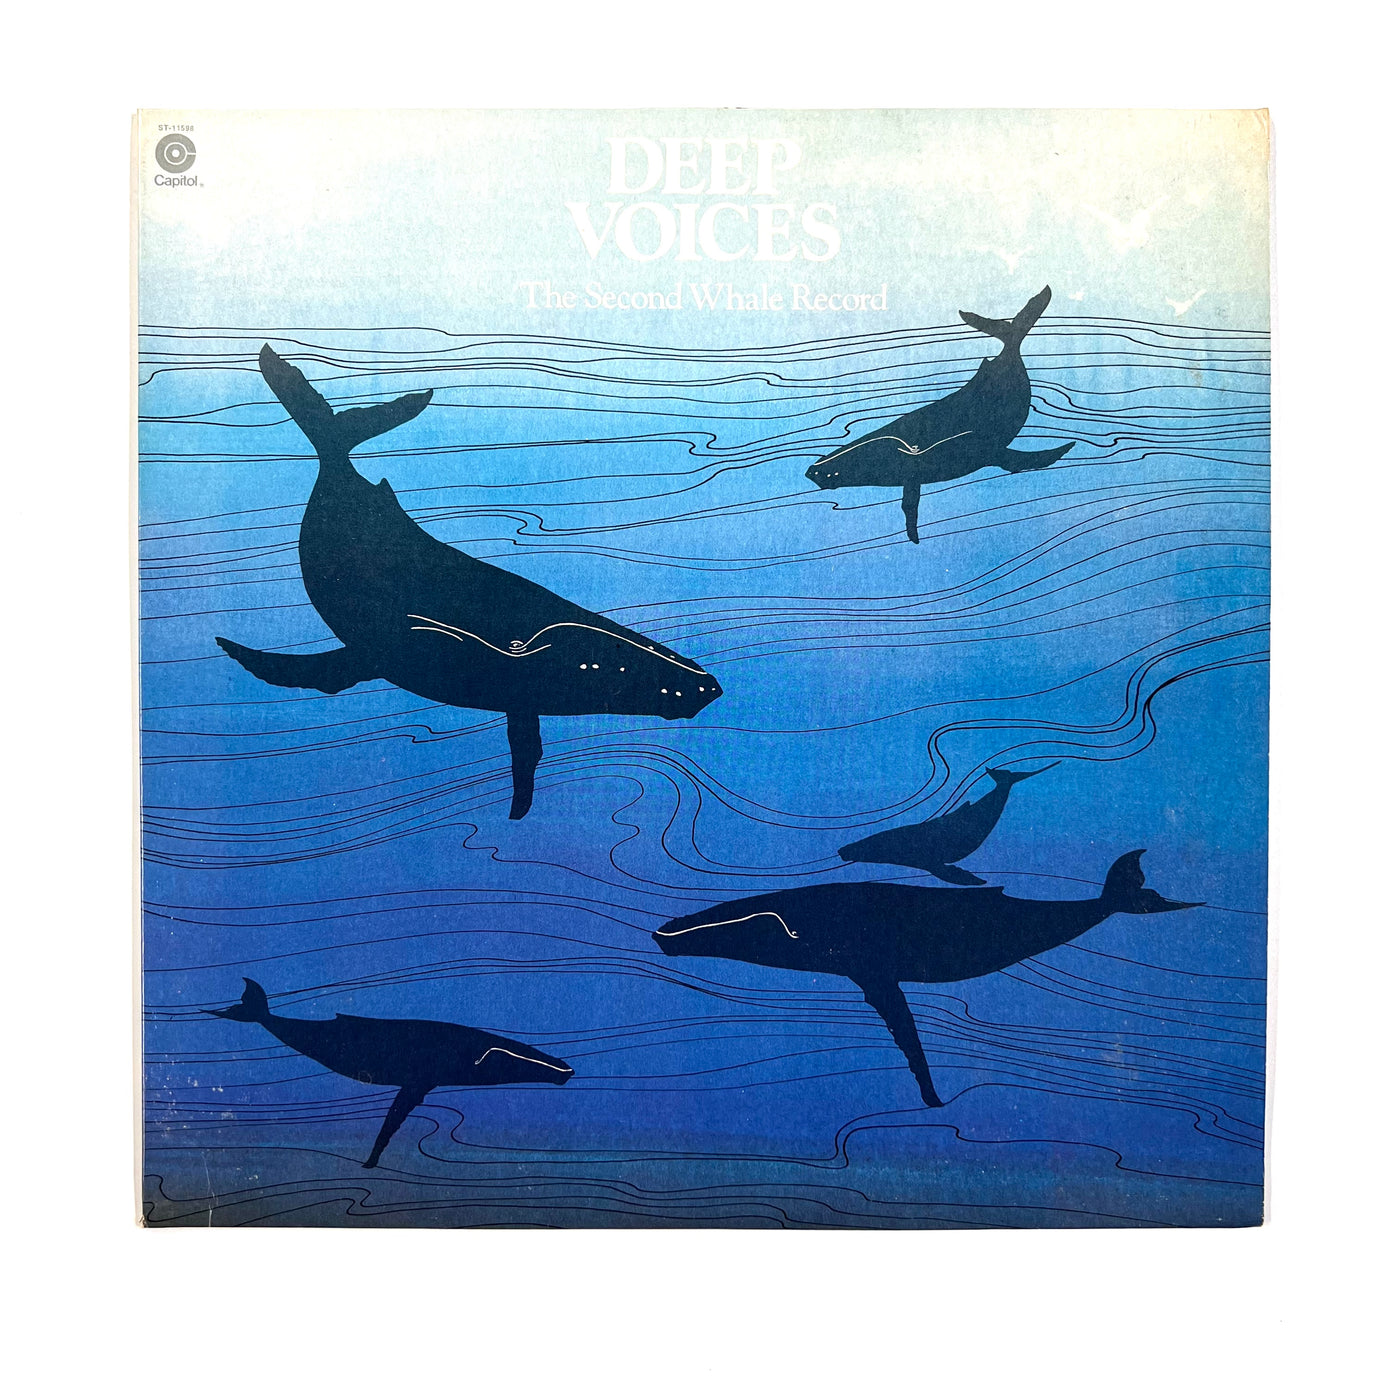 Whales - Deep Voices - The Second Whale Record